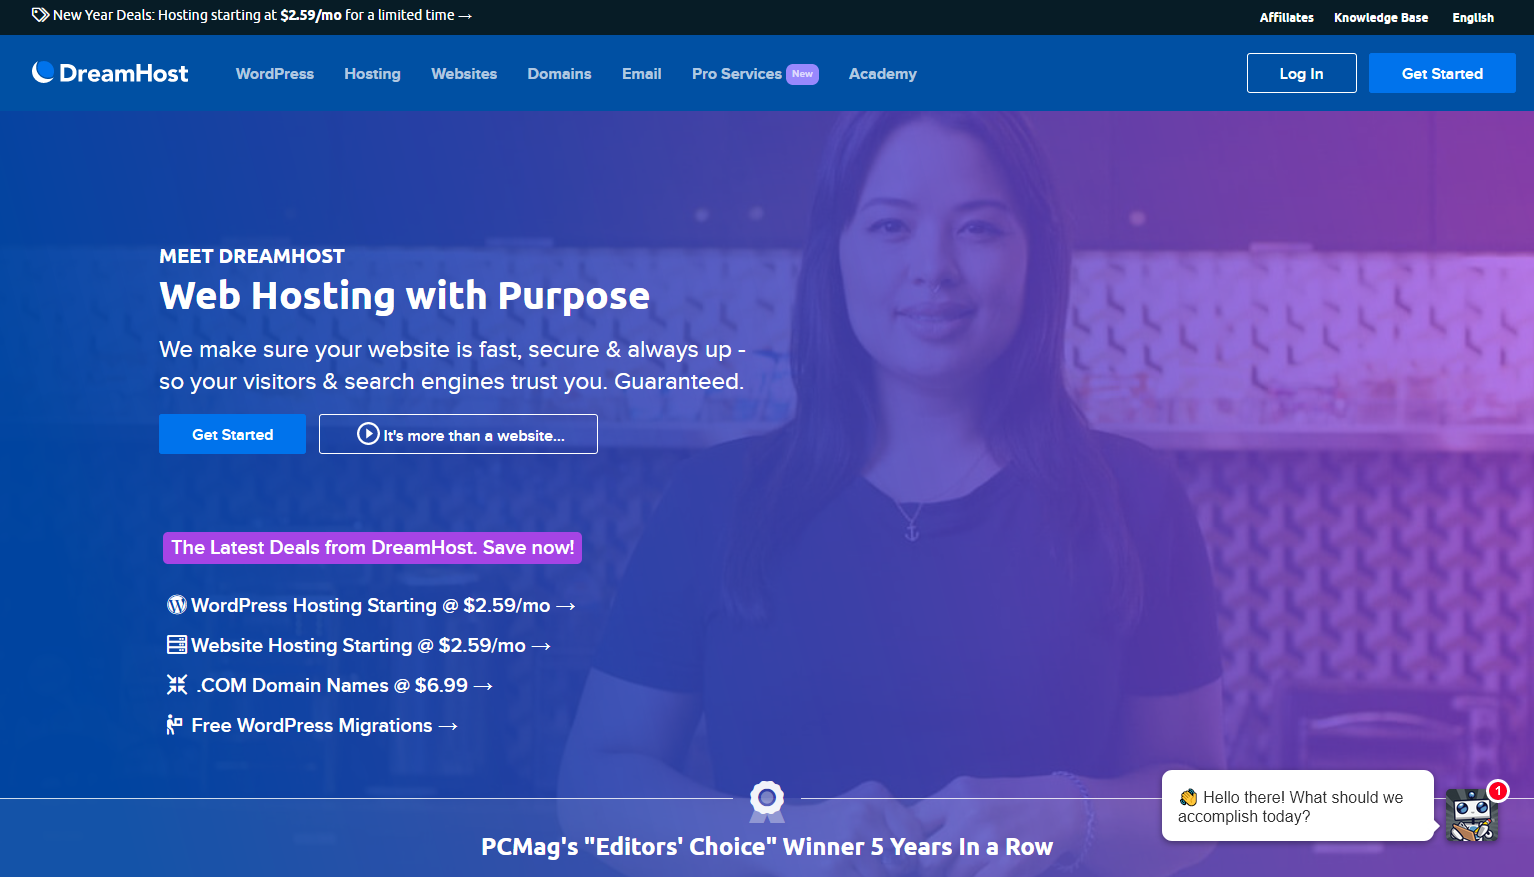 DreamHost is WordPress Hosting with a purpose